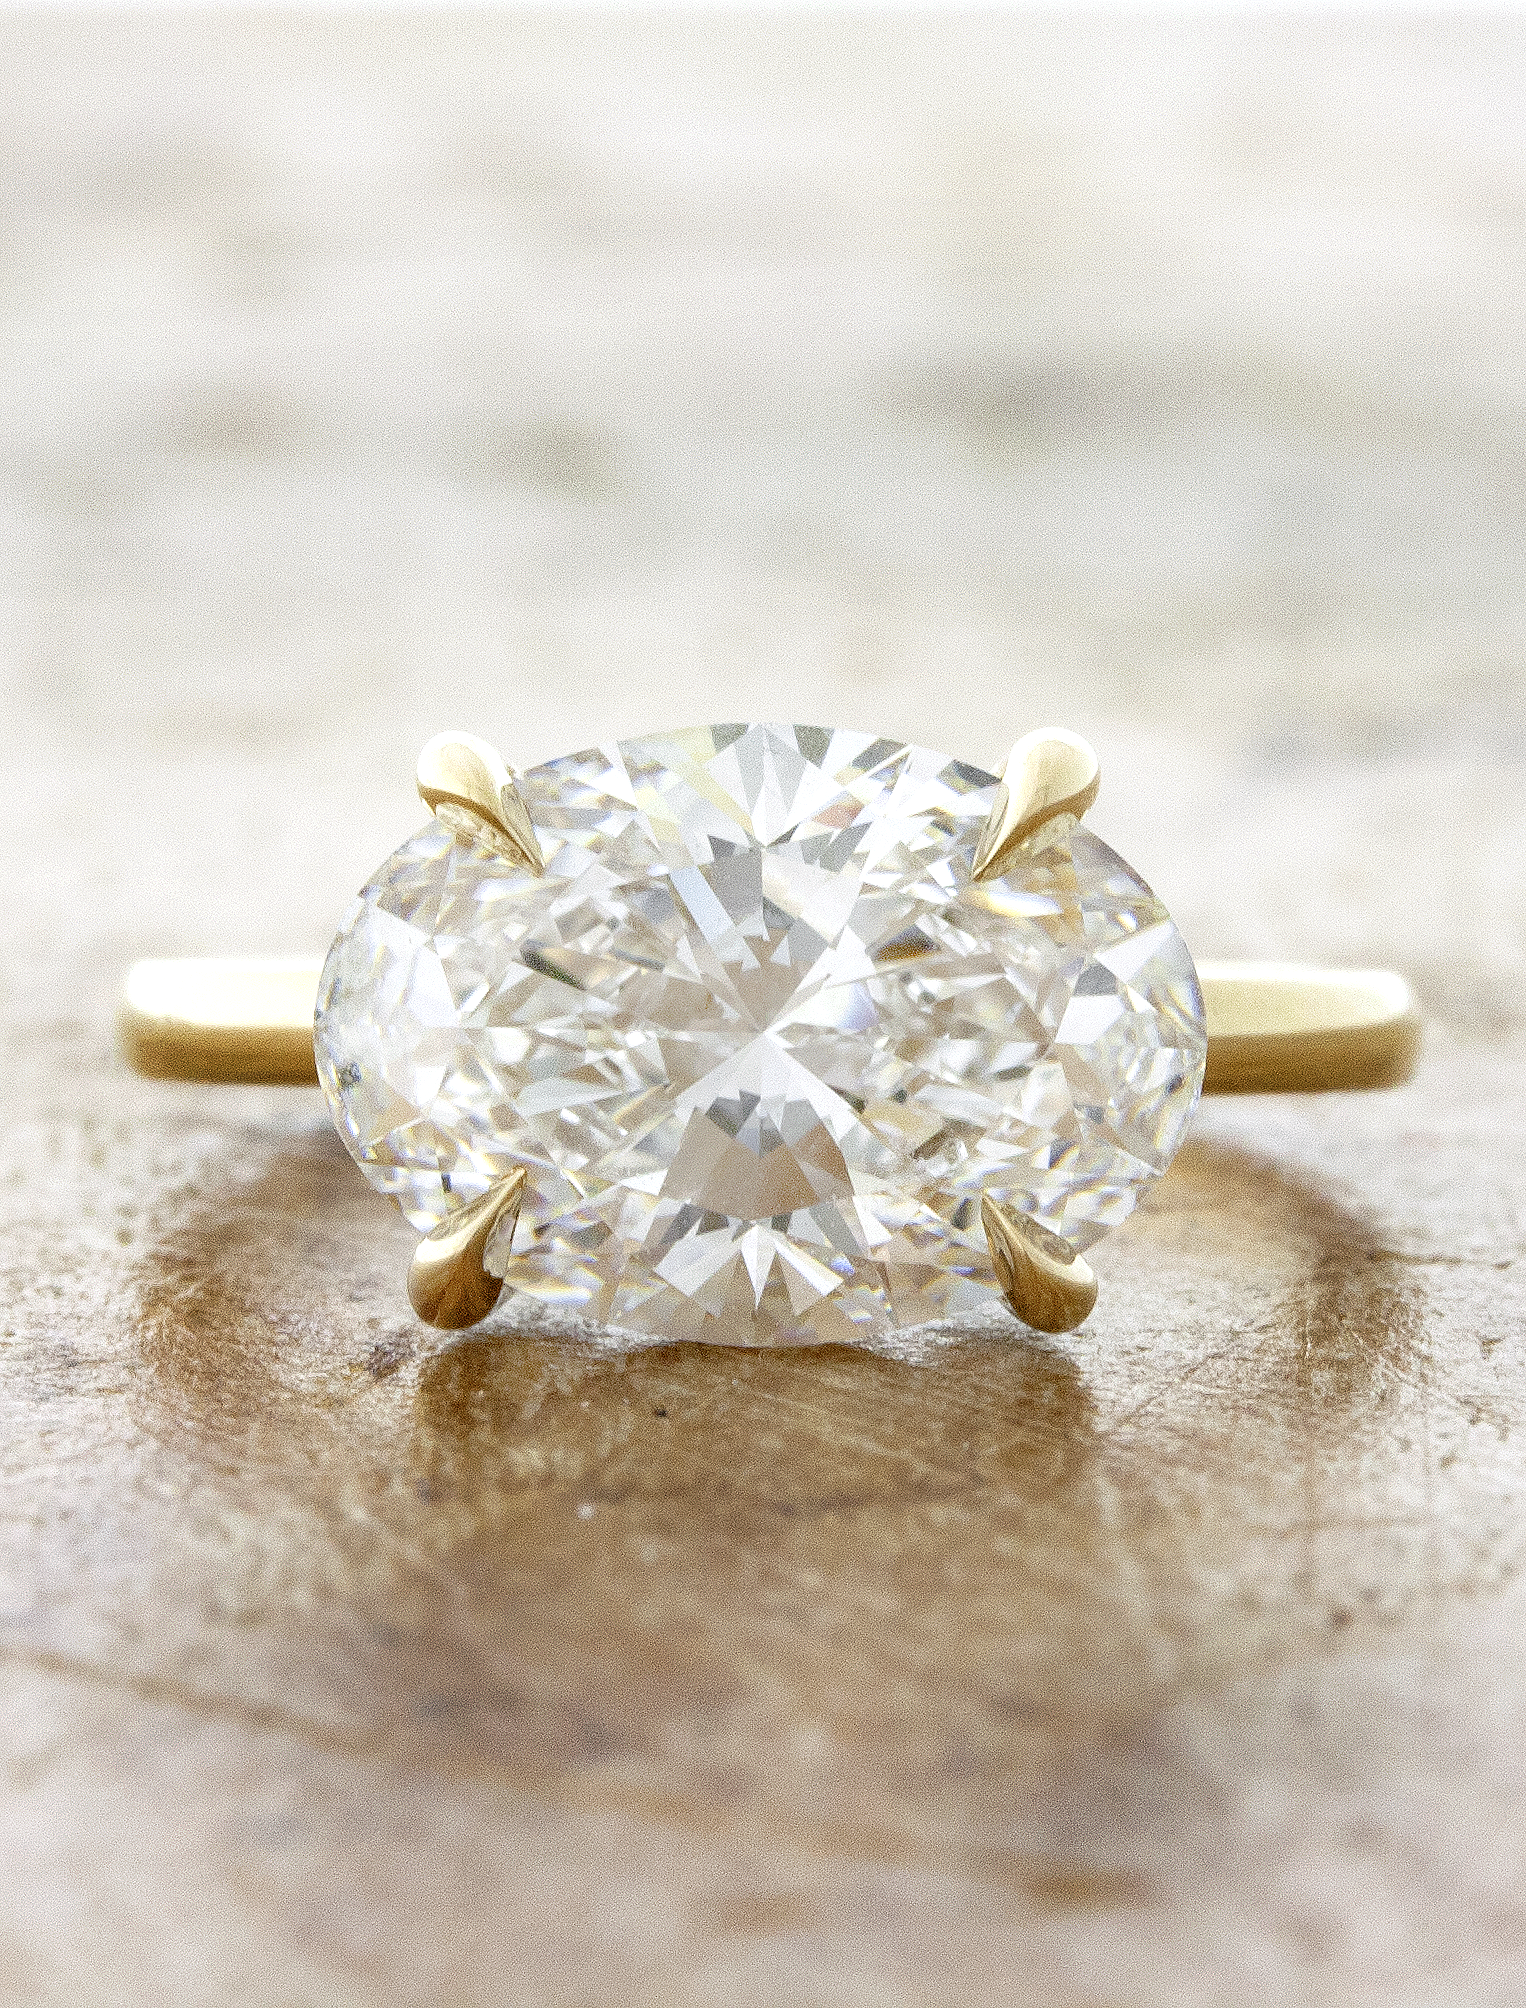 caption:Emi engagement ring with 3ct oval diamond